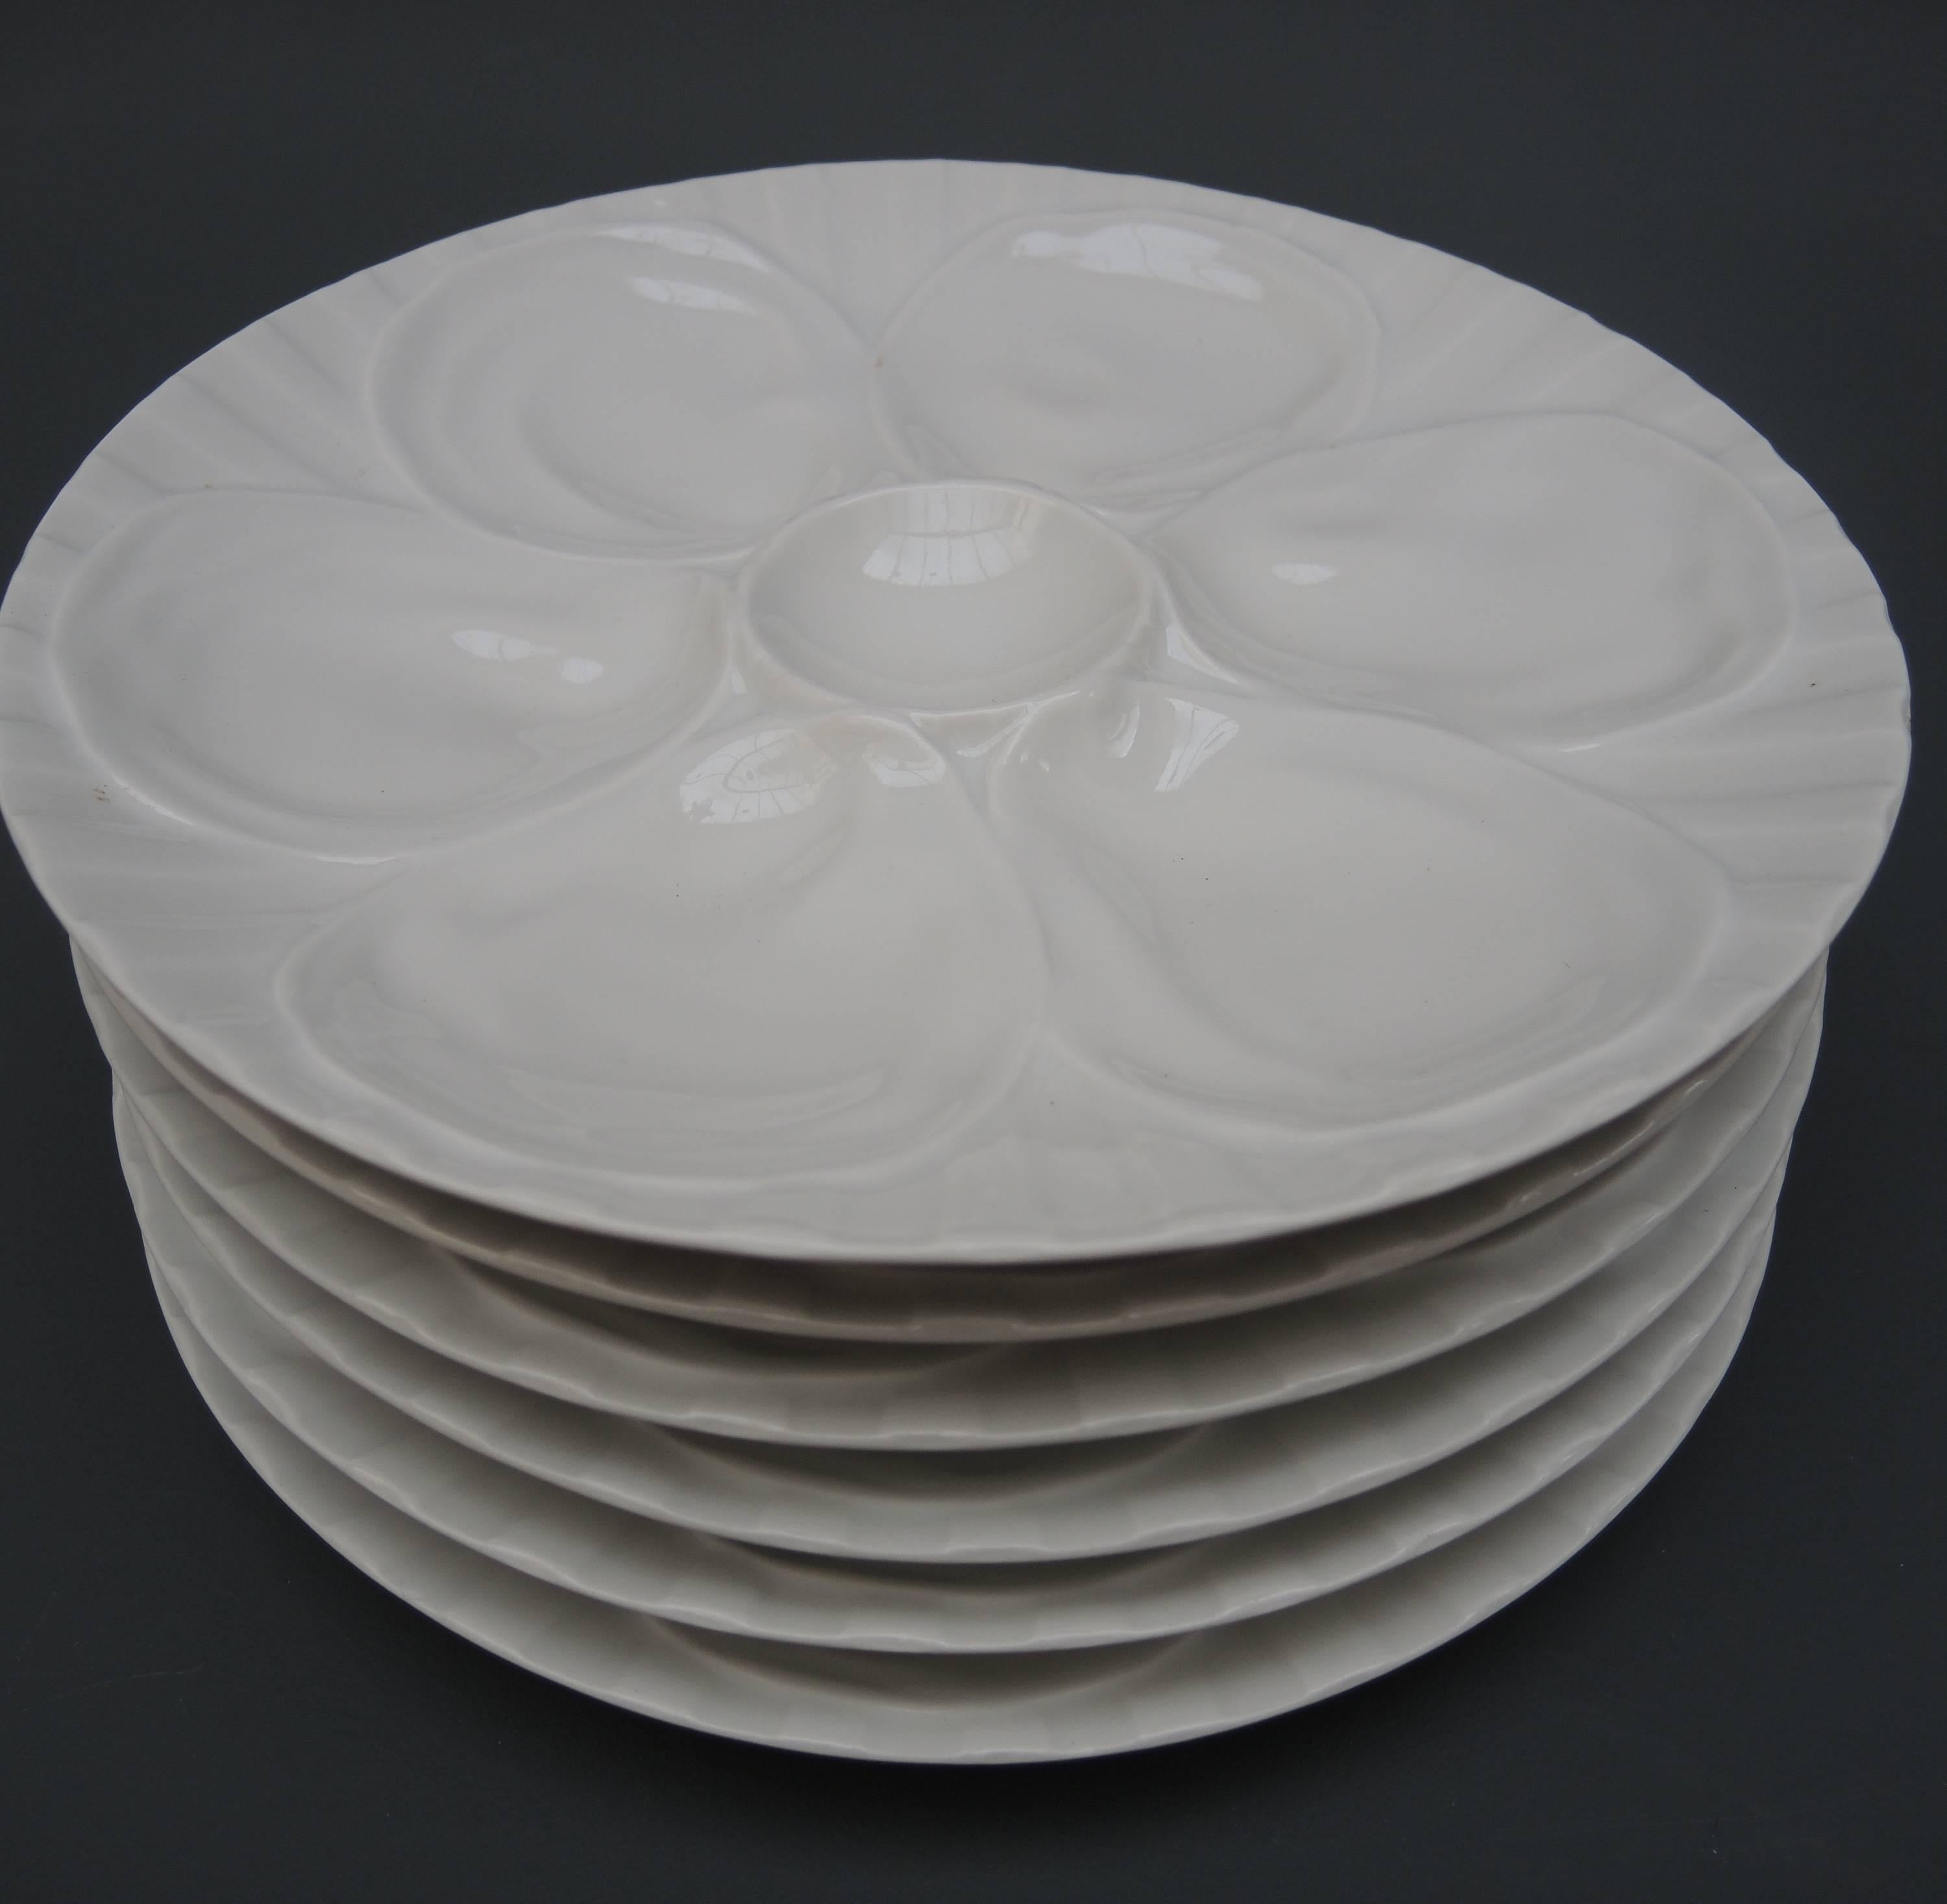 A set of six French white porcelain oyster plates made by Pillivuyt.
In excellent condition and in the original basket.